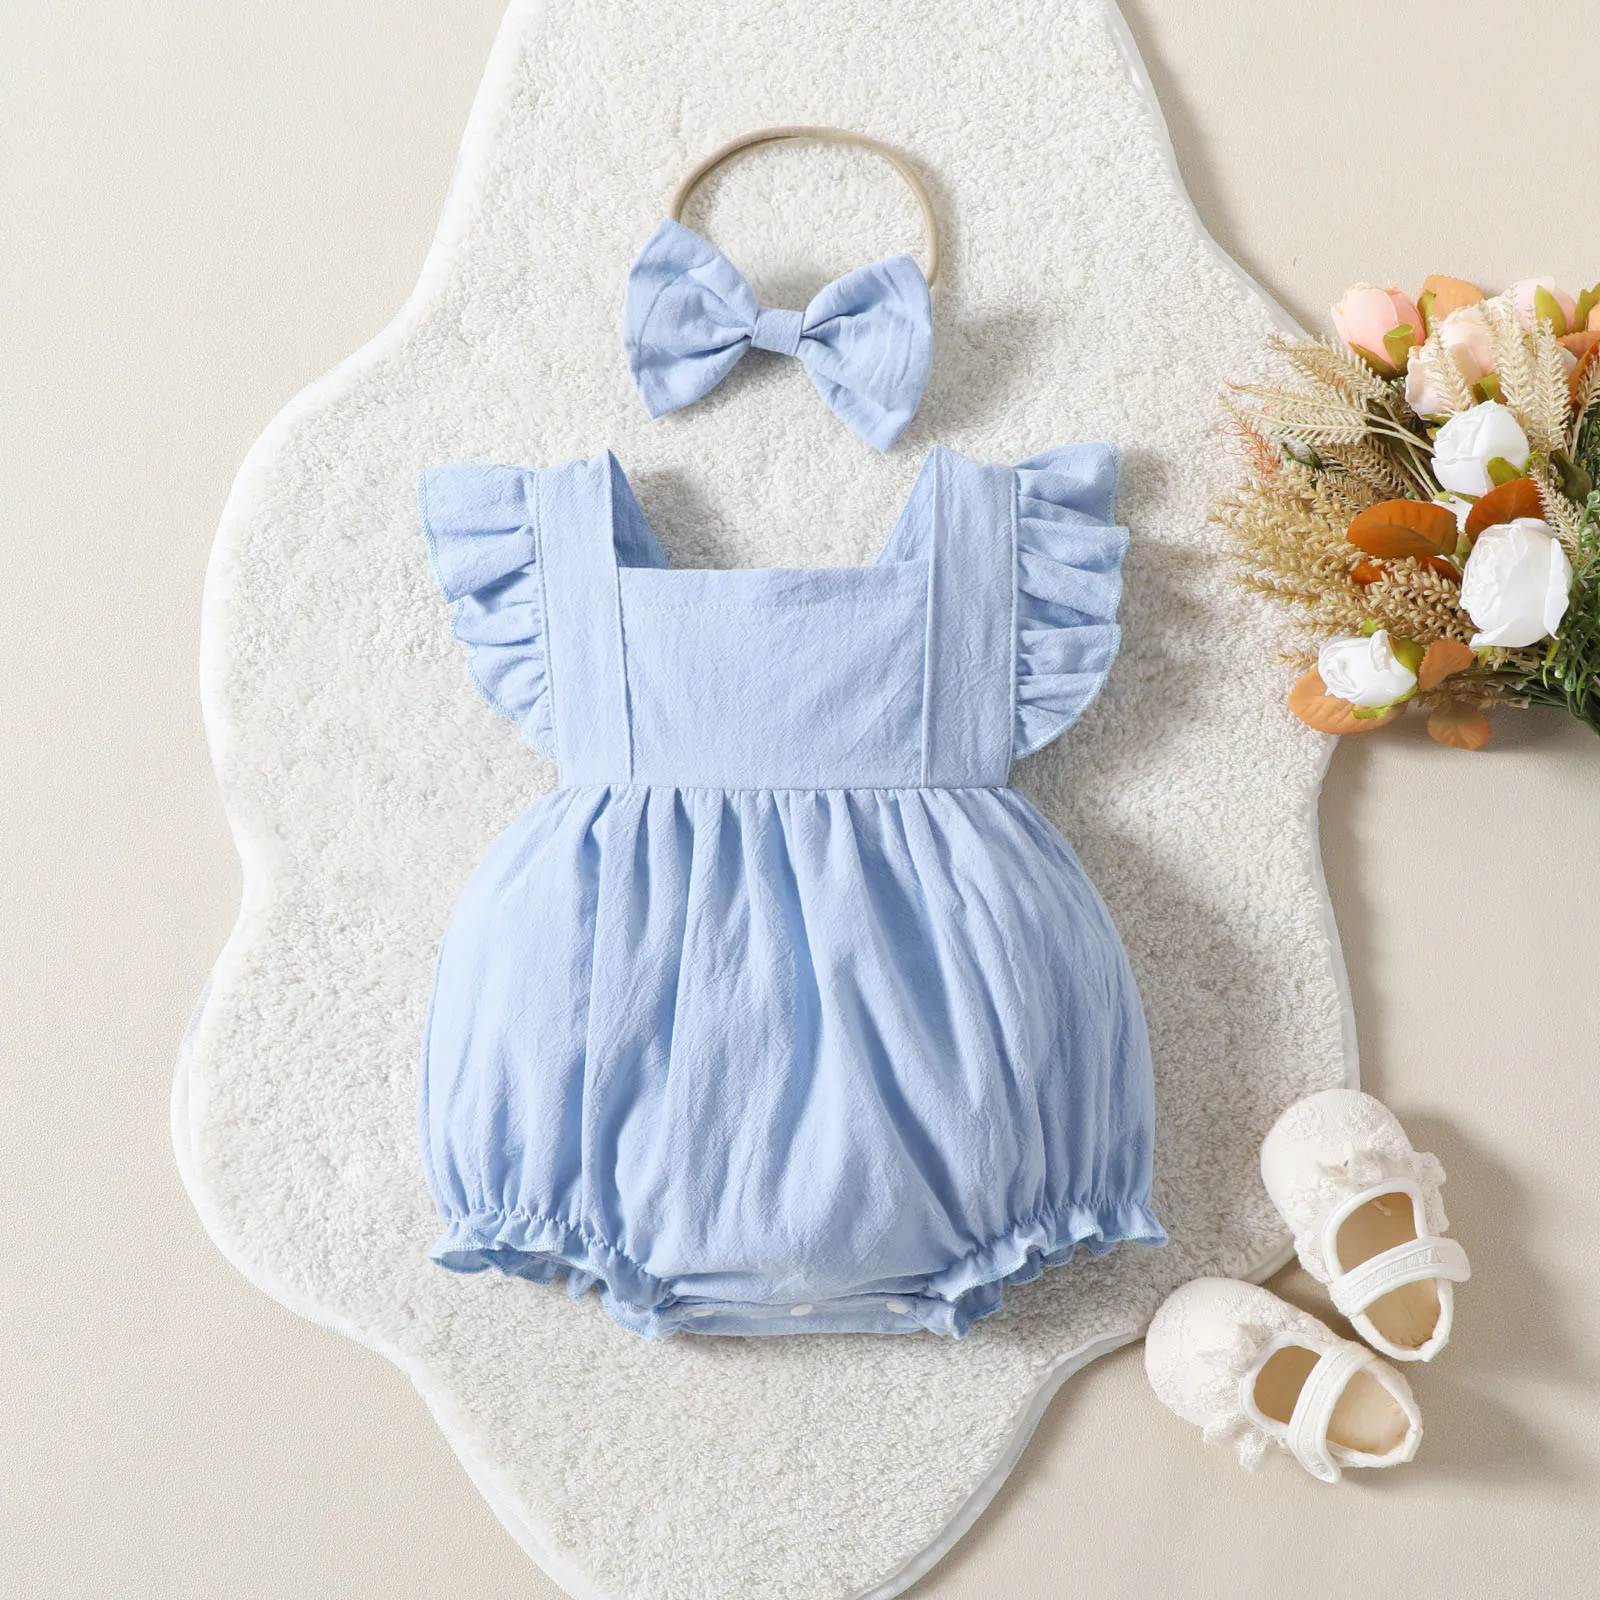 

2pcs Lovely Baby Girls Romper 12M 18M Ruffles Fly Sleeve Square Neck Frill Trim Solid Color Jumpsuits+Bow Headband Baby Clothes